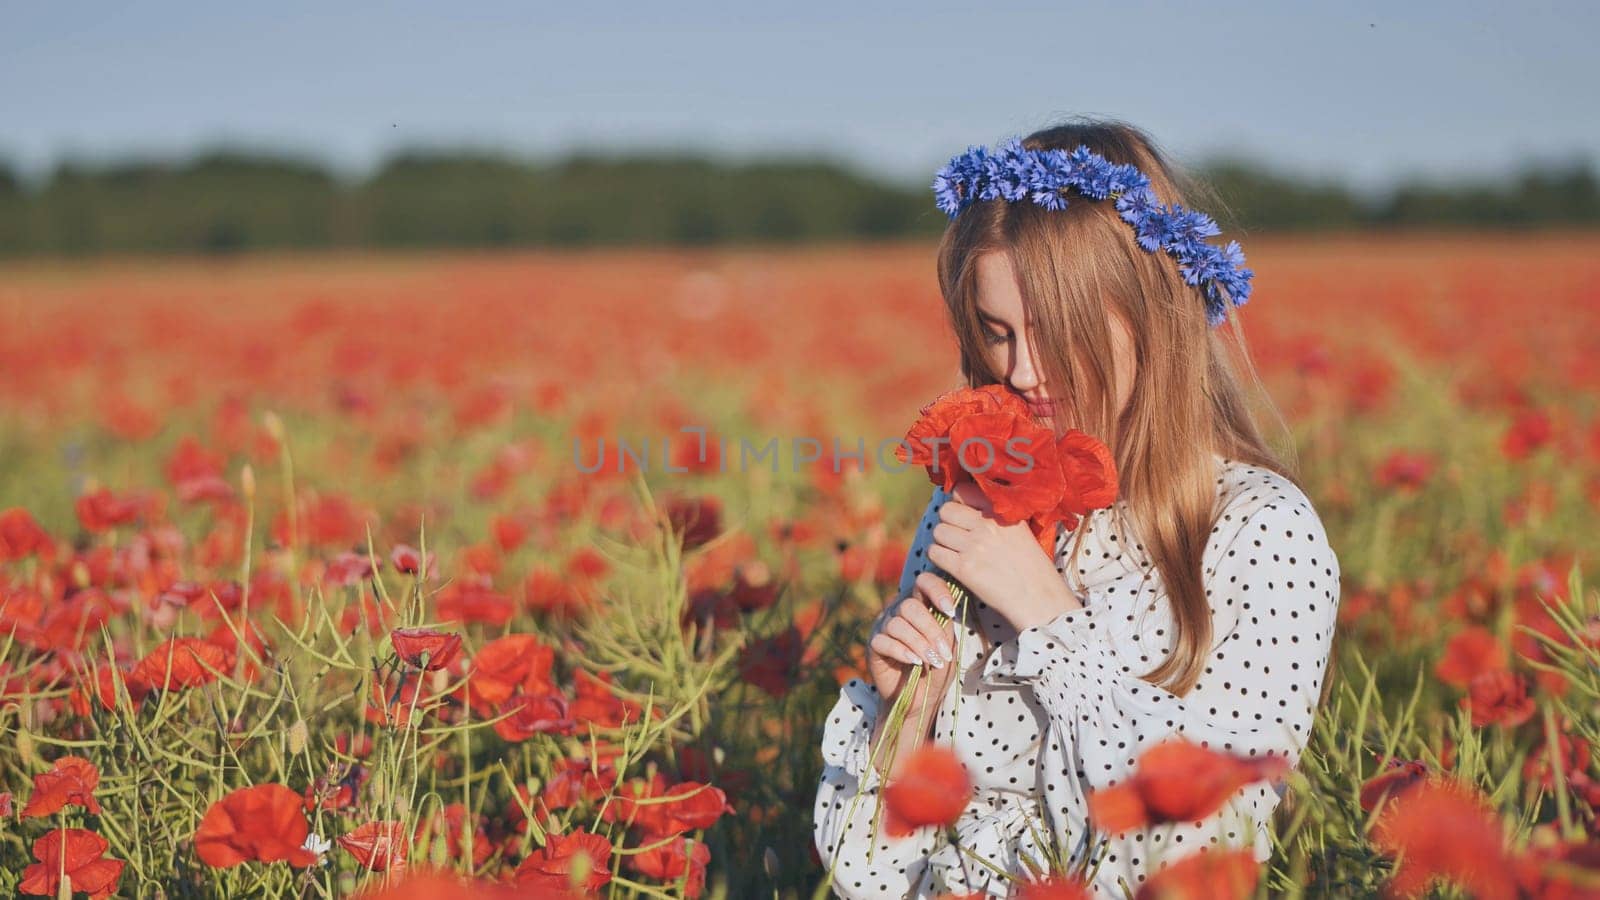 Ukrainian girl collecting and smelling a bouquet of poppies in a field of poppies